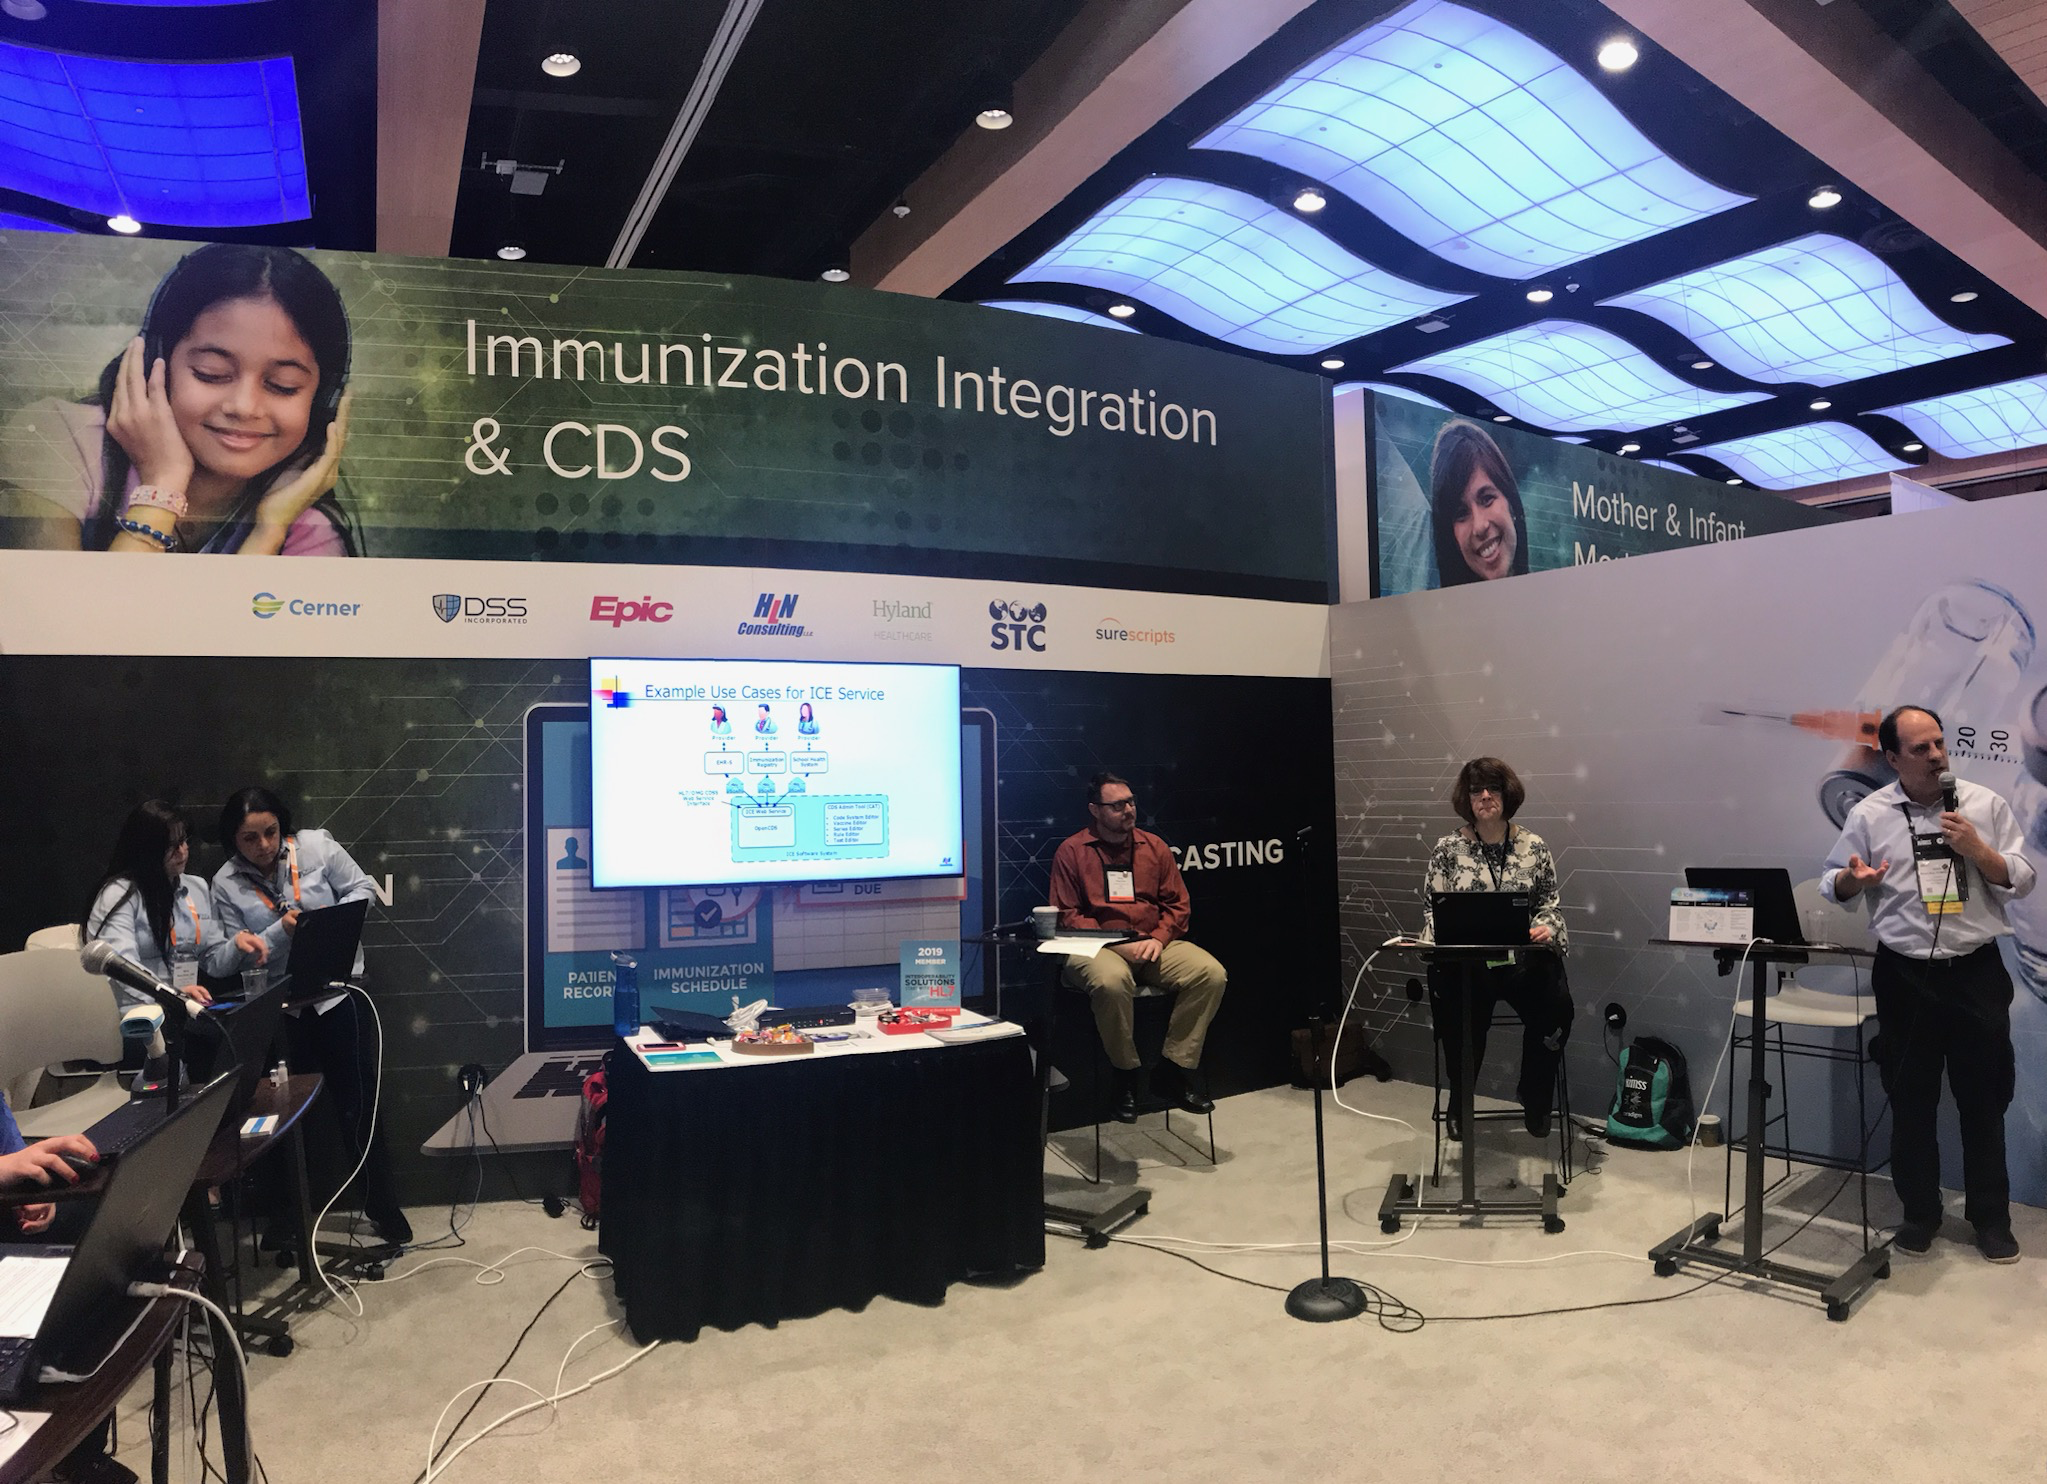 So I Survived HIMSS19…